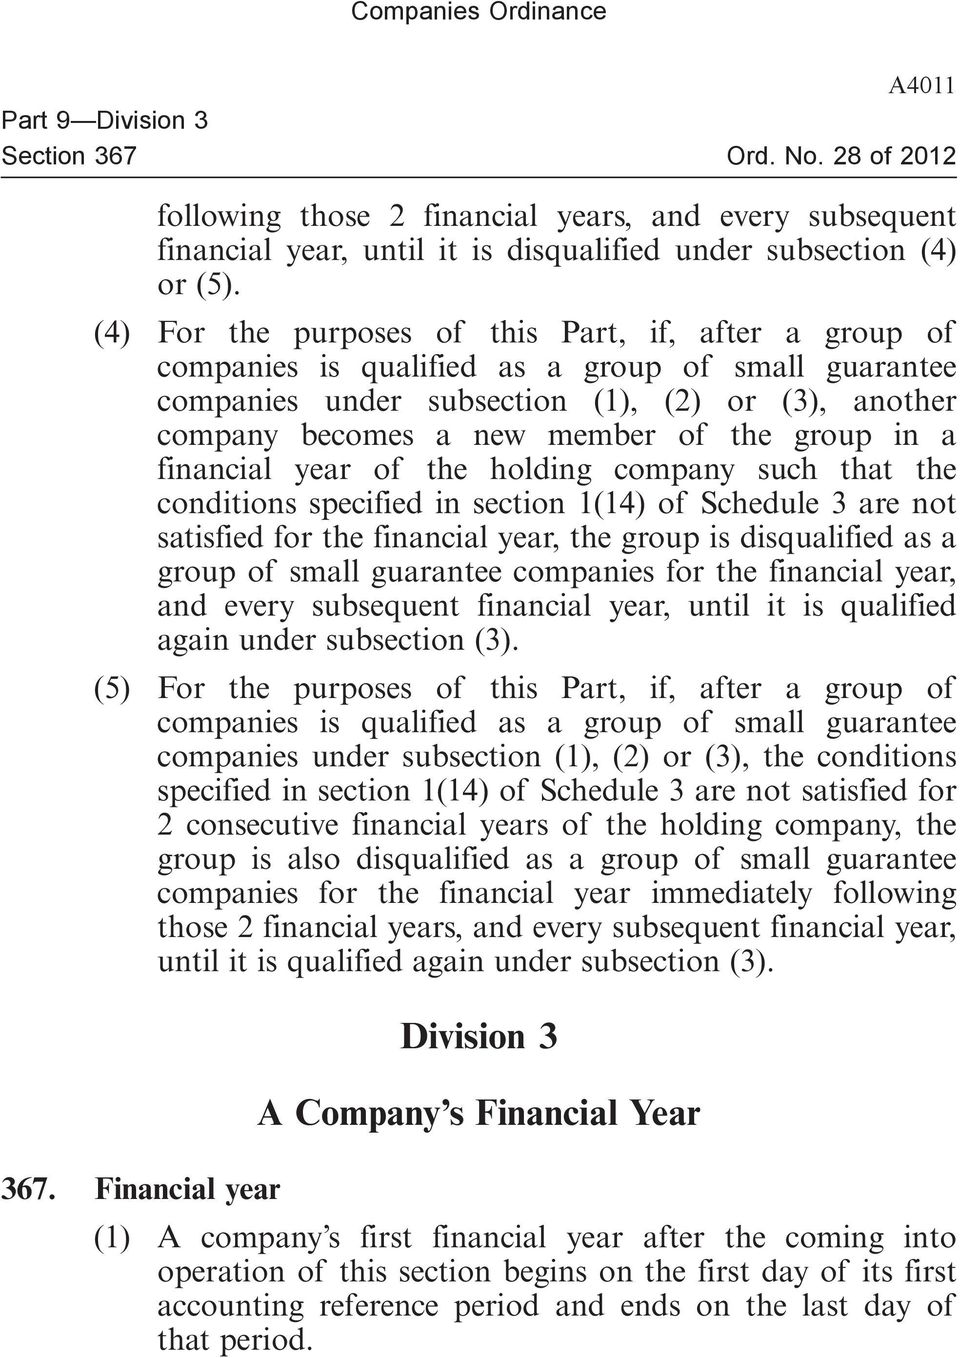 group in a financial year of the holding company such that the conditions specified in section 1(14) of Schedule 3 are not satisfied for the financial year, the group is disqualified as a group of